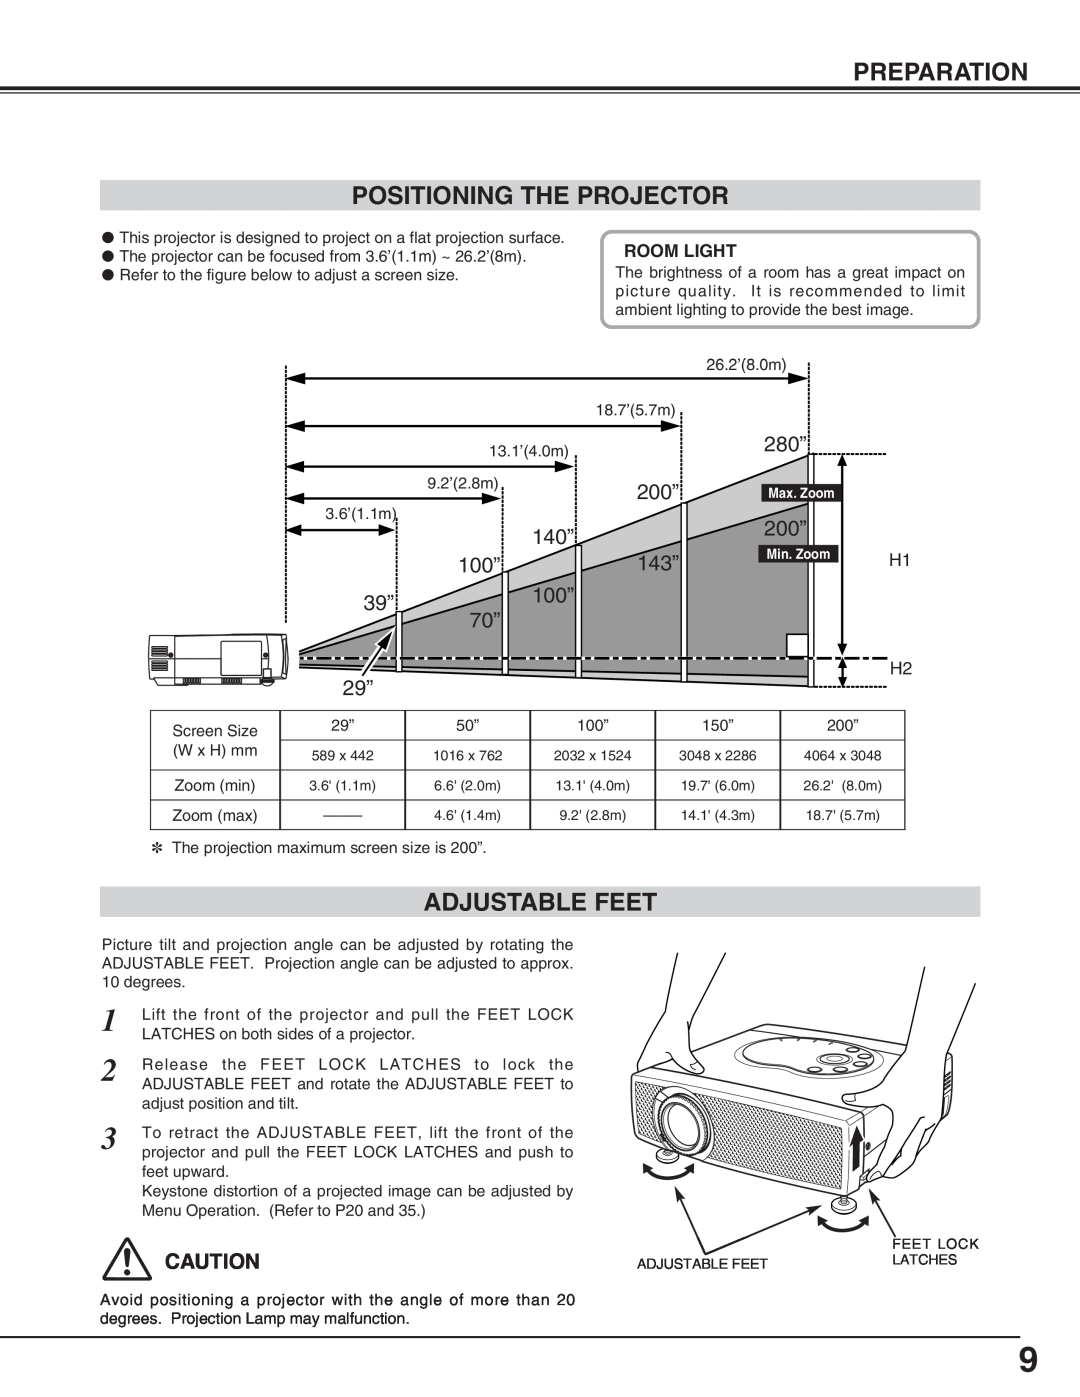 Canon LV-X2 owner manual Preparation Positioning The Projector, Adjustable Feet, Room Light 